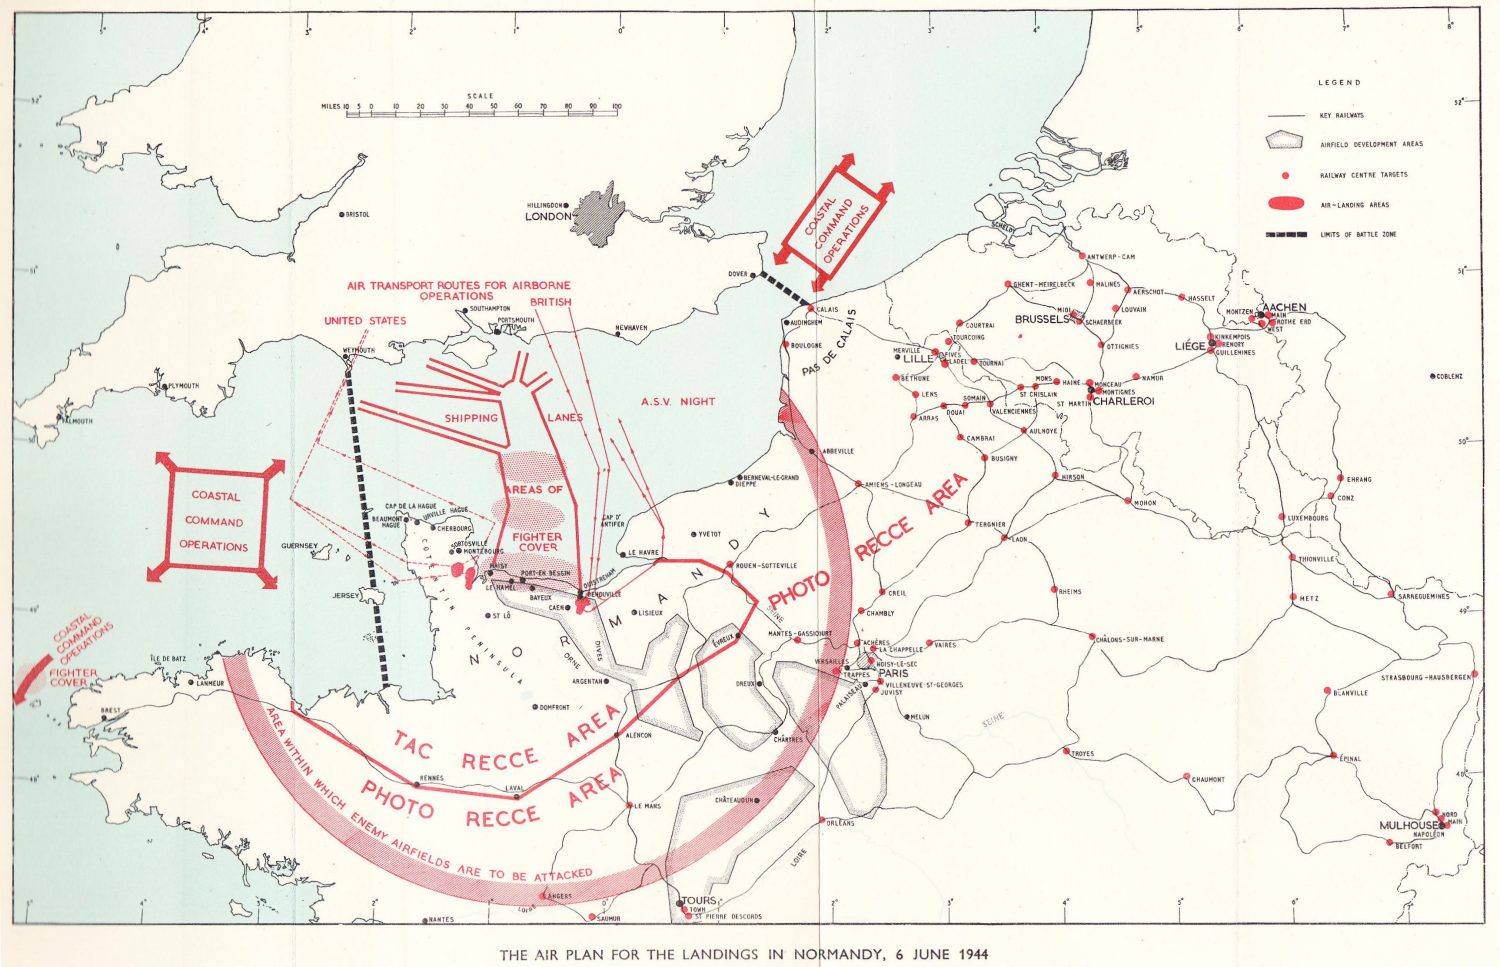 Map of the Allied air plan for the landings in Normandy, 6 June 1944. (From Saunders, Hilary St. George. Royal Air Force 1939-1945, Volume III: The Fight Is Won. London: Her Majesty’s Stationery Office, 1954. Public domain via Hyperwar website).